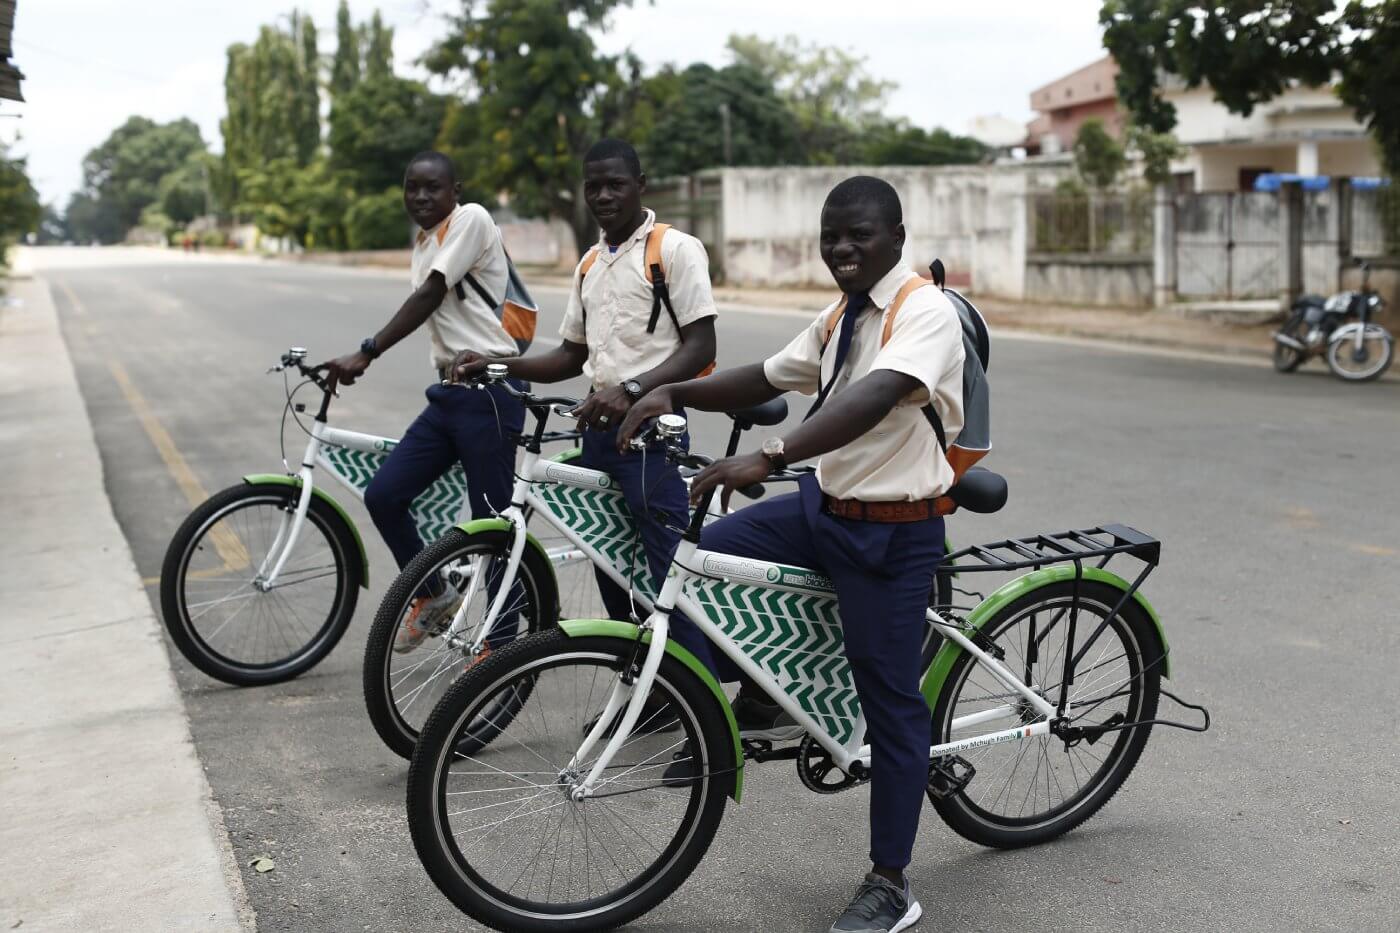 Three people wearing orange shirts and black pants ride green and white Mozambike bicycles with baskets on the back, on a street surrounded by trees and buildings.